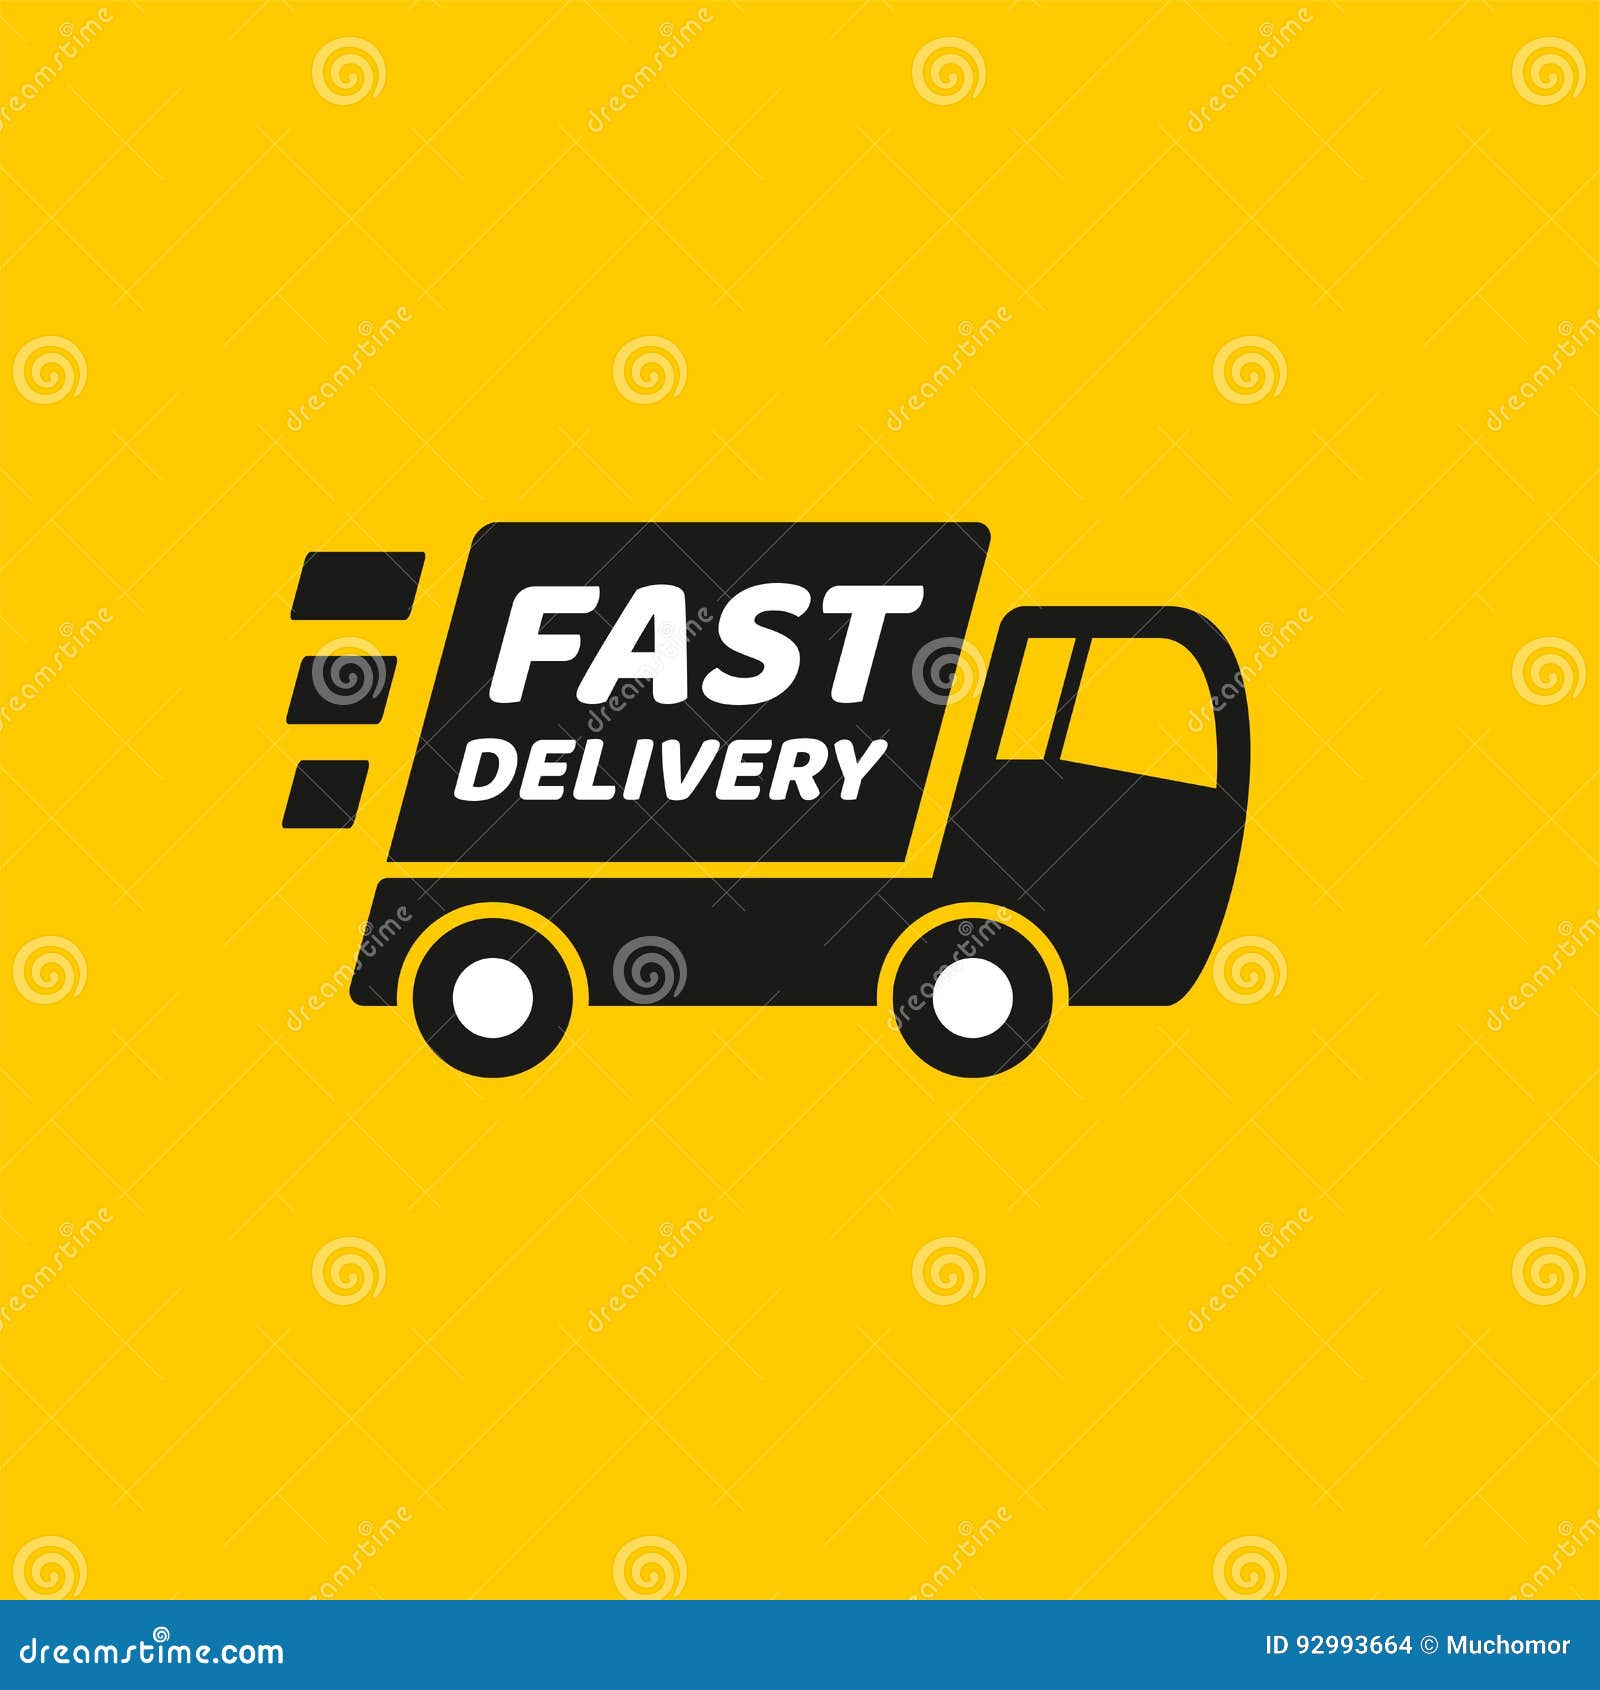 Fast Delivery. Truck Icon on Yellow Background Stock Vector ...